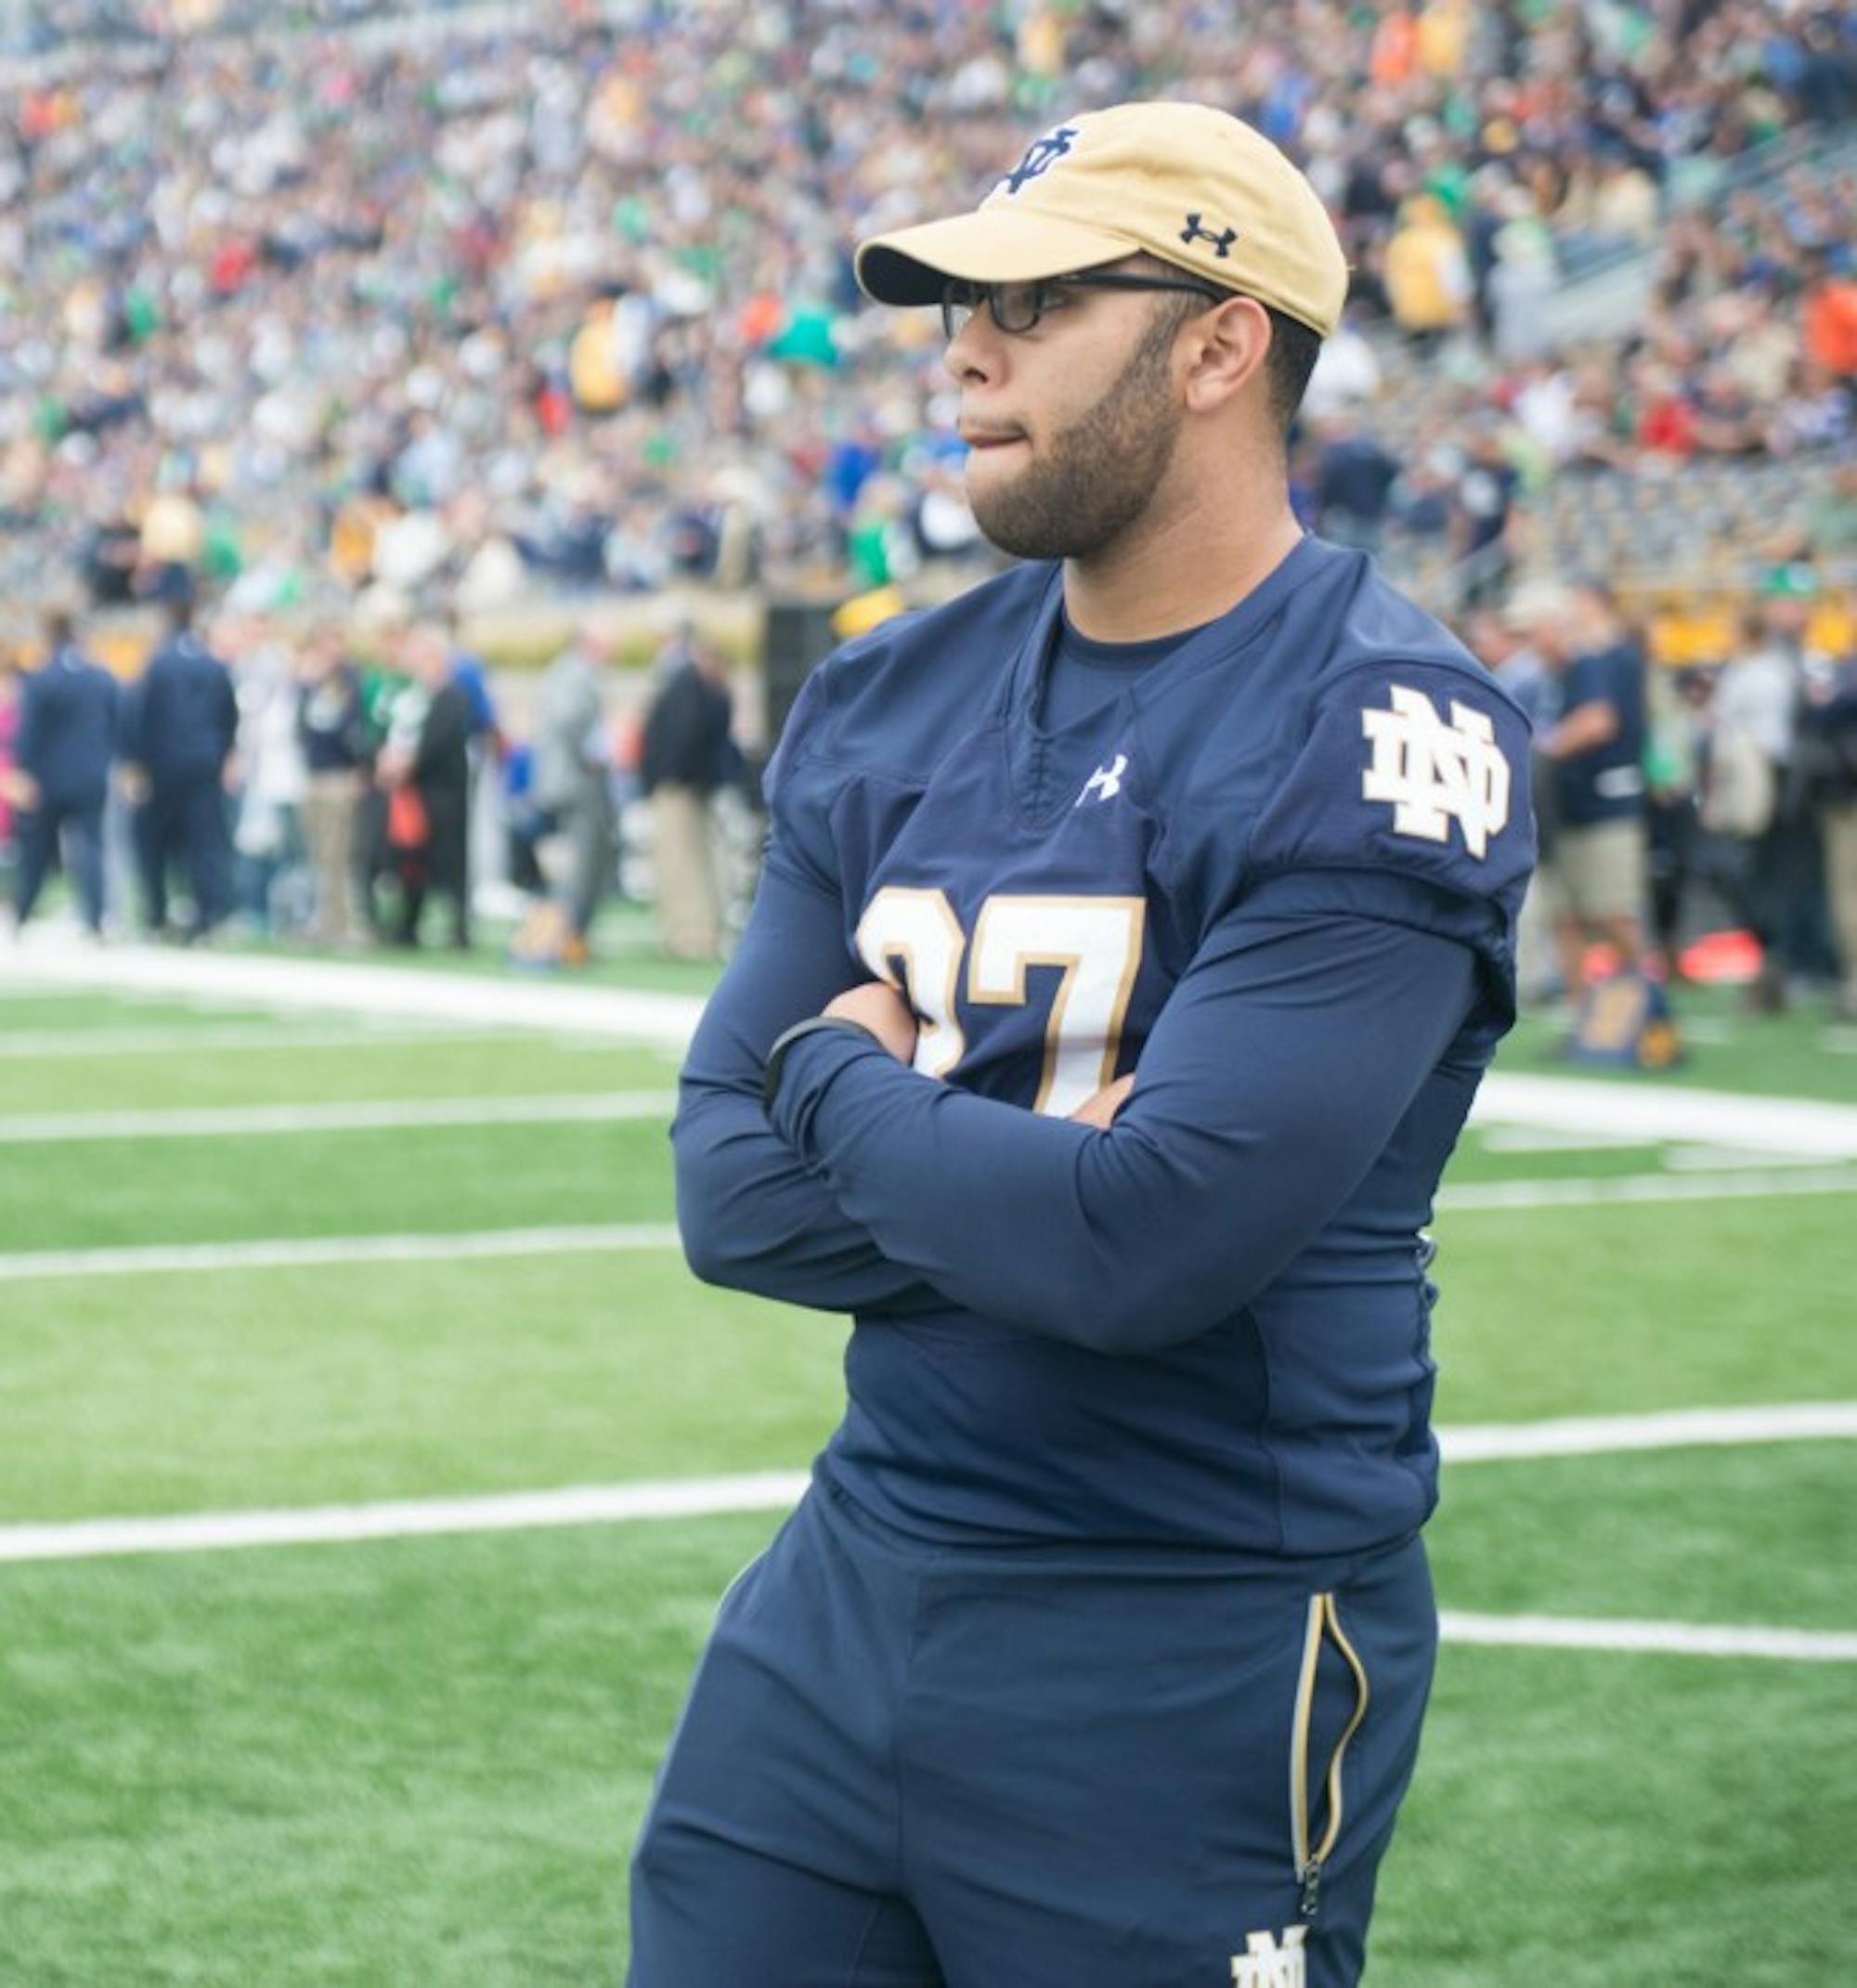 Irish senior receiver Omar Hunter, still recovering from a torn ACL, takes in warm ups in street clothes before the Irish took on Miami.